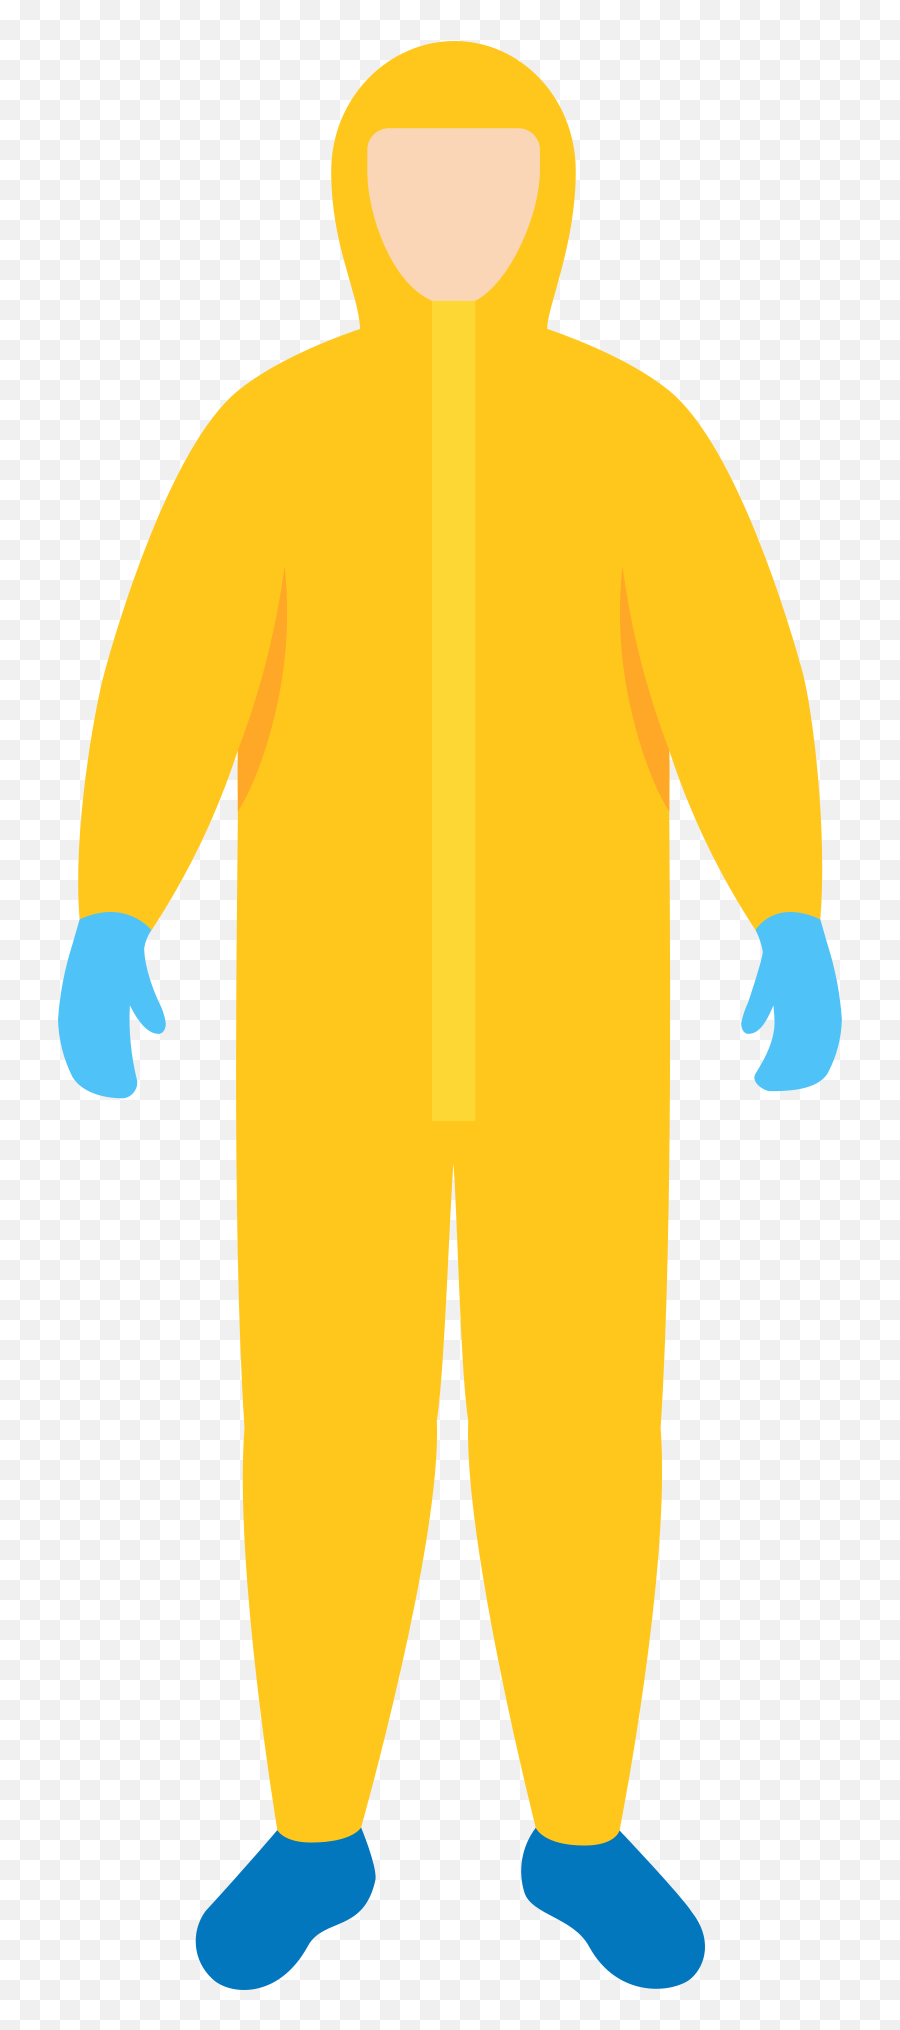 Man In Protective Suit Clipart Illustrations U0026 Images In Png Emoji,Rain Coat Clipart